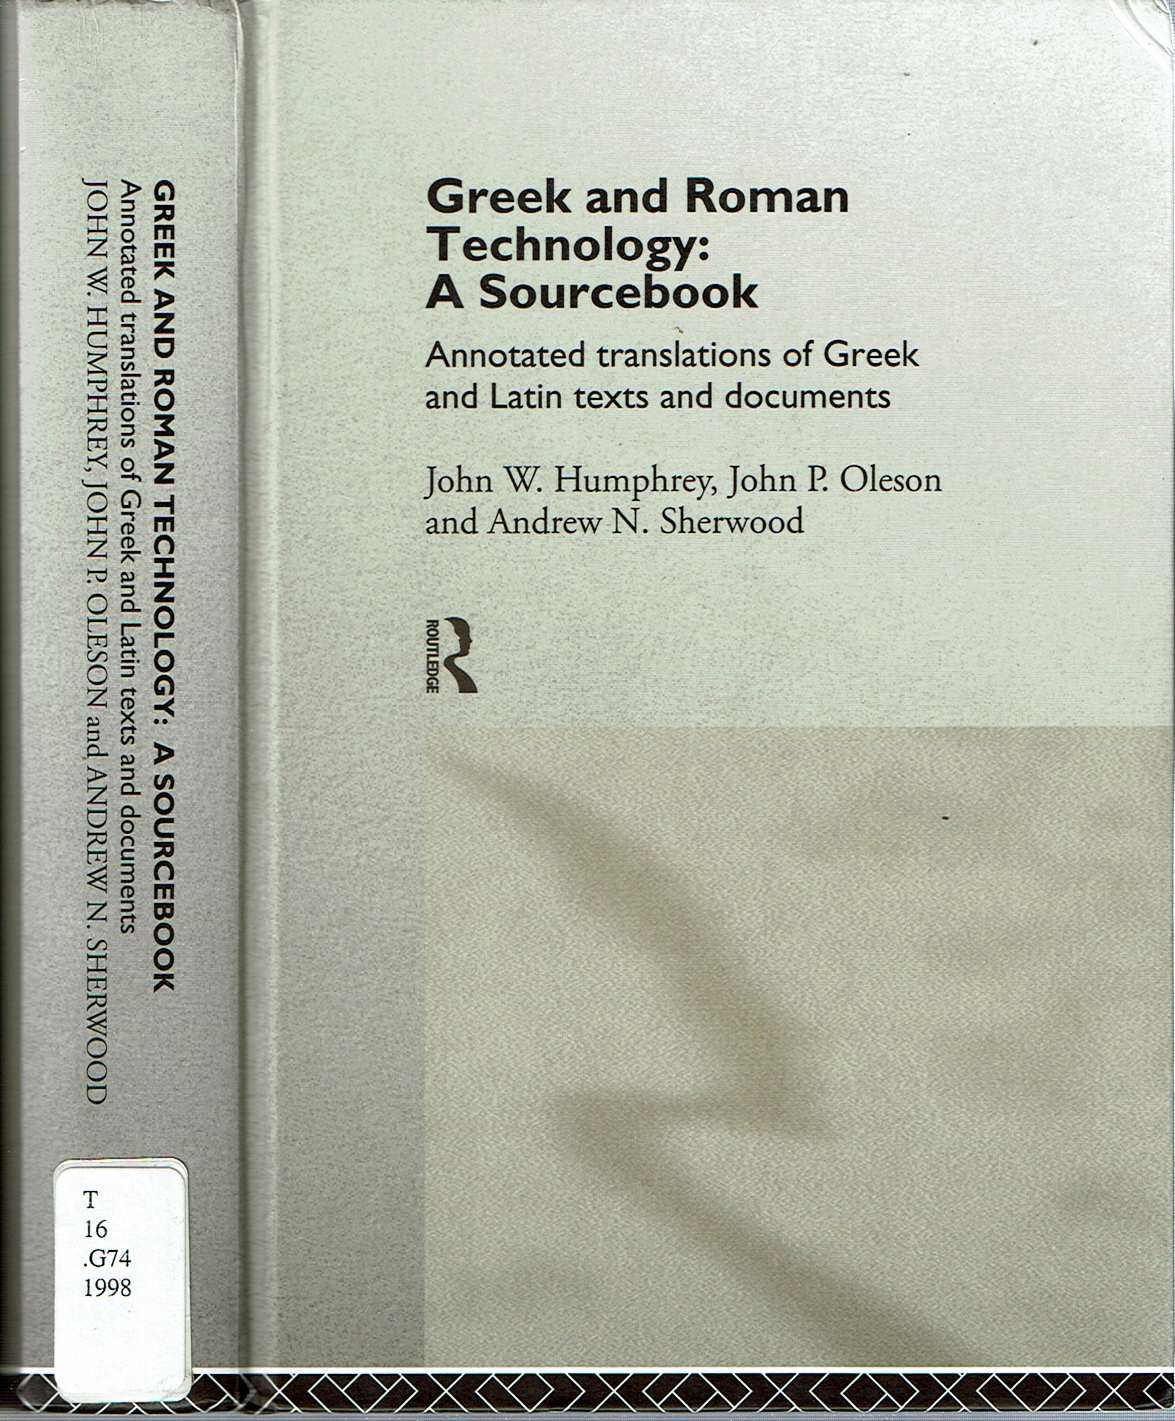 Greek and Roman Technology : A Sourcebook: Annotated Translations of Greek and Latin Texts and Documents - Humphrey, John W, John P Oleson and Andrew N Sherwood